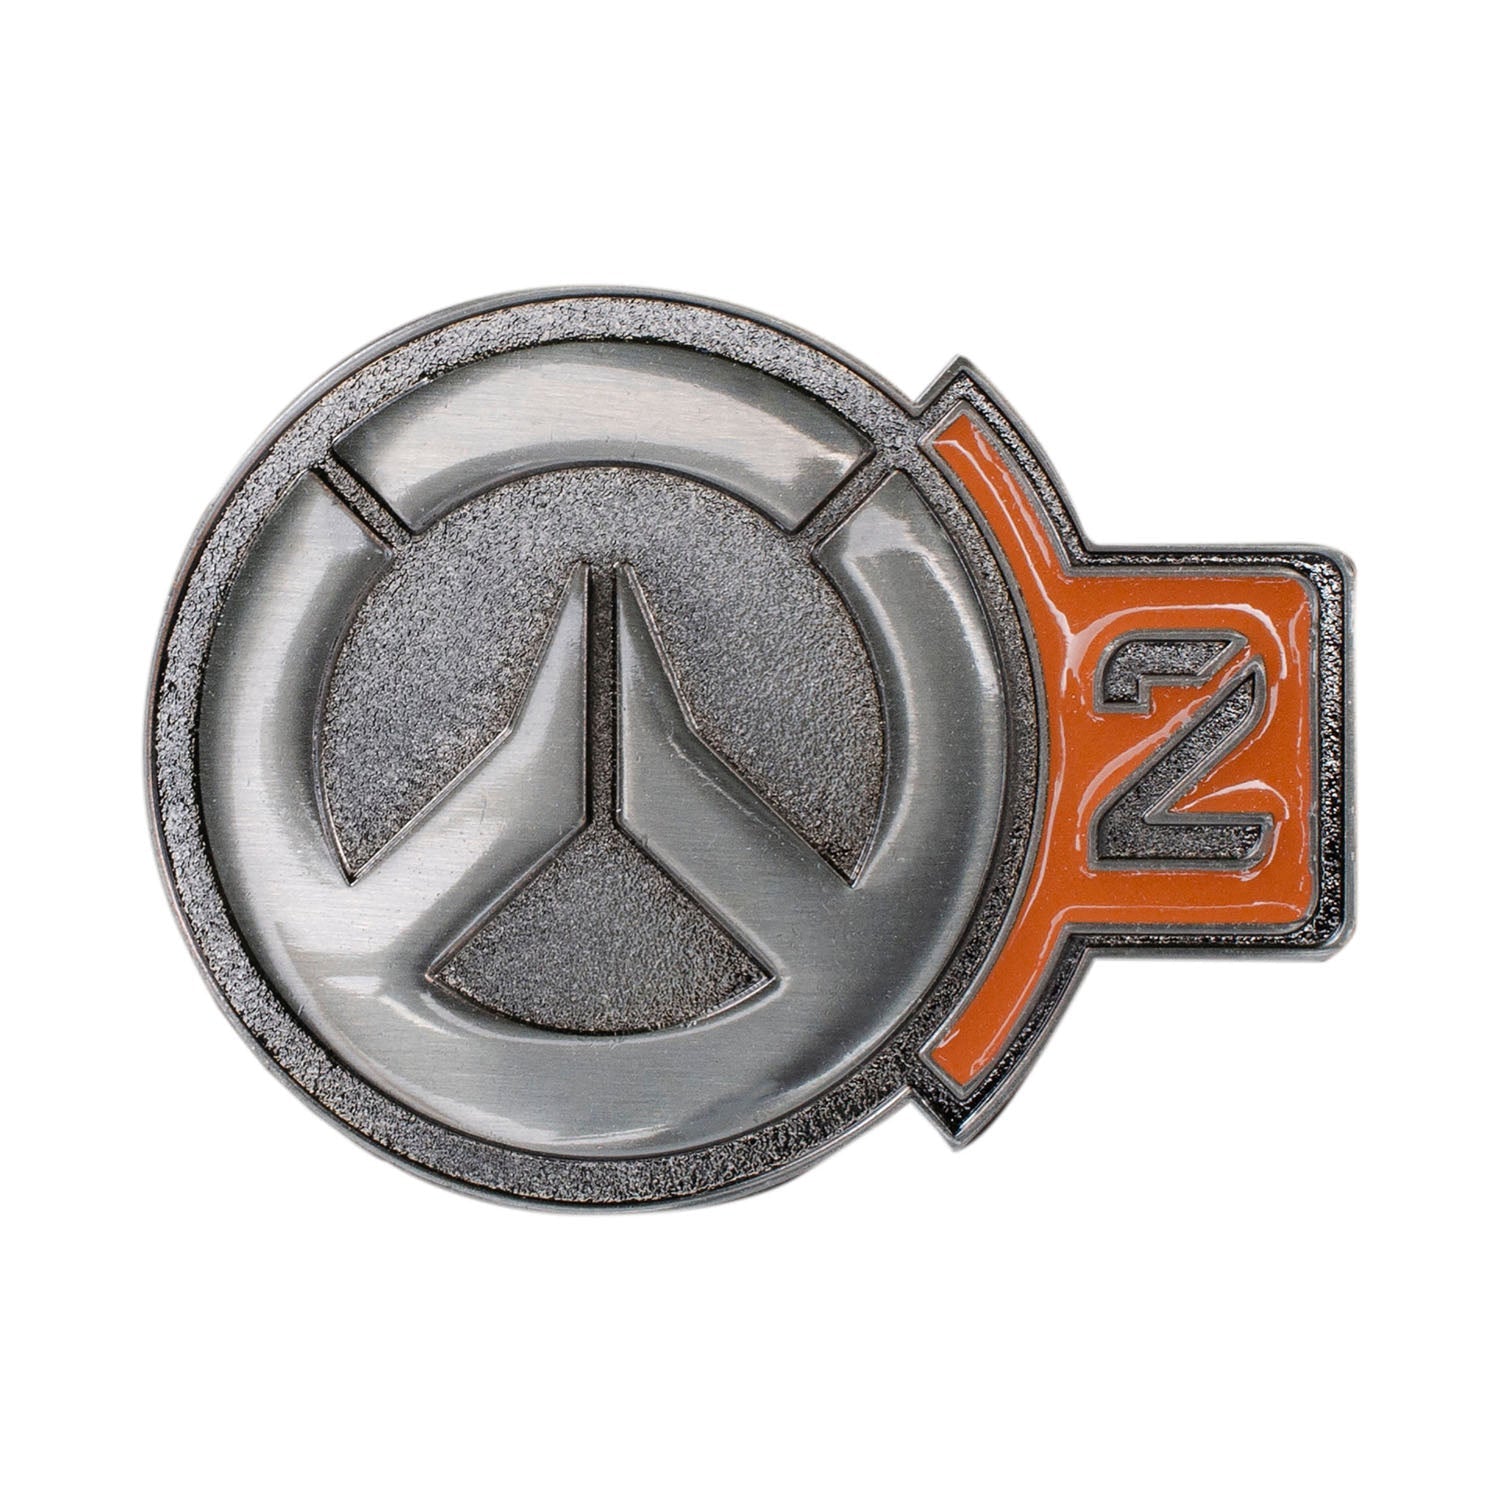 Overwatch 2 Collector's Edition Pin in Grey - Zoom View